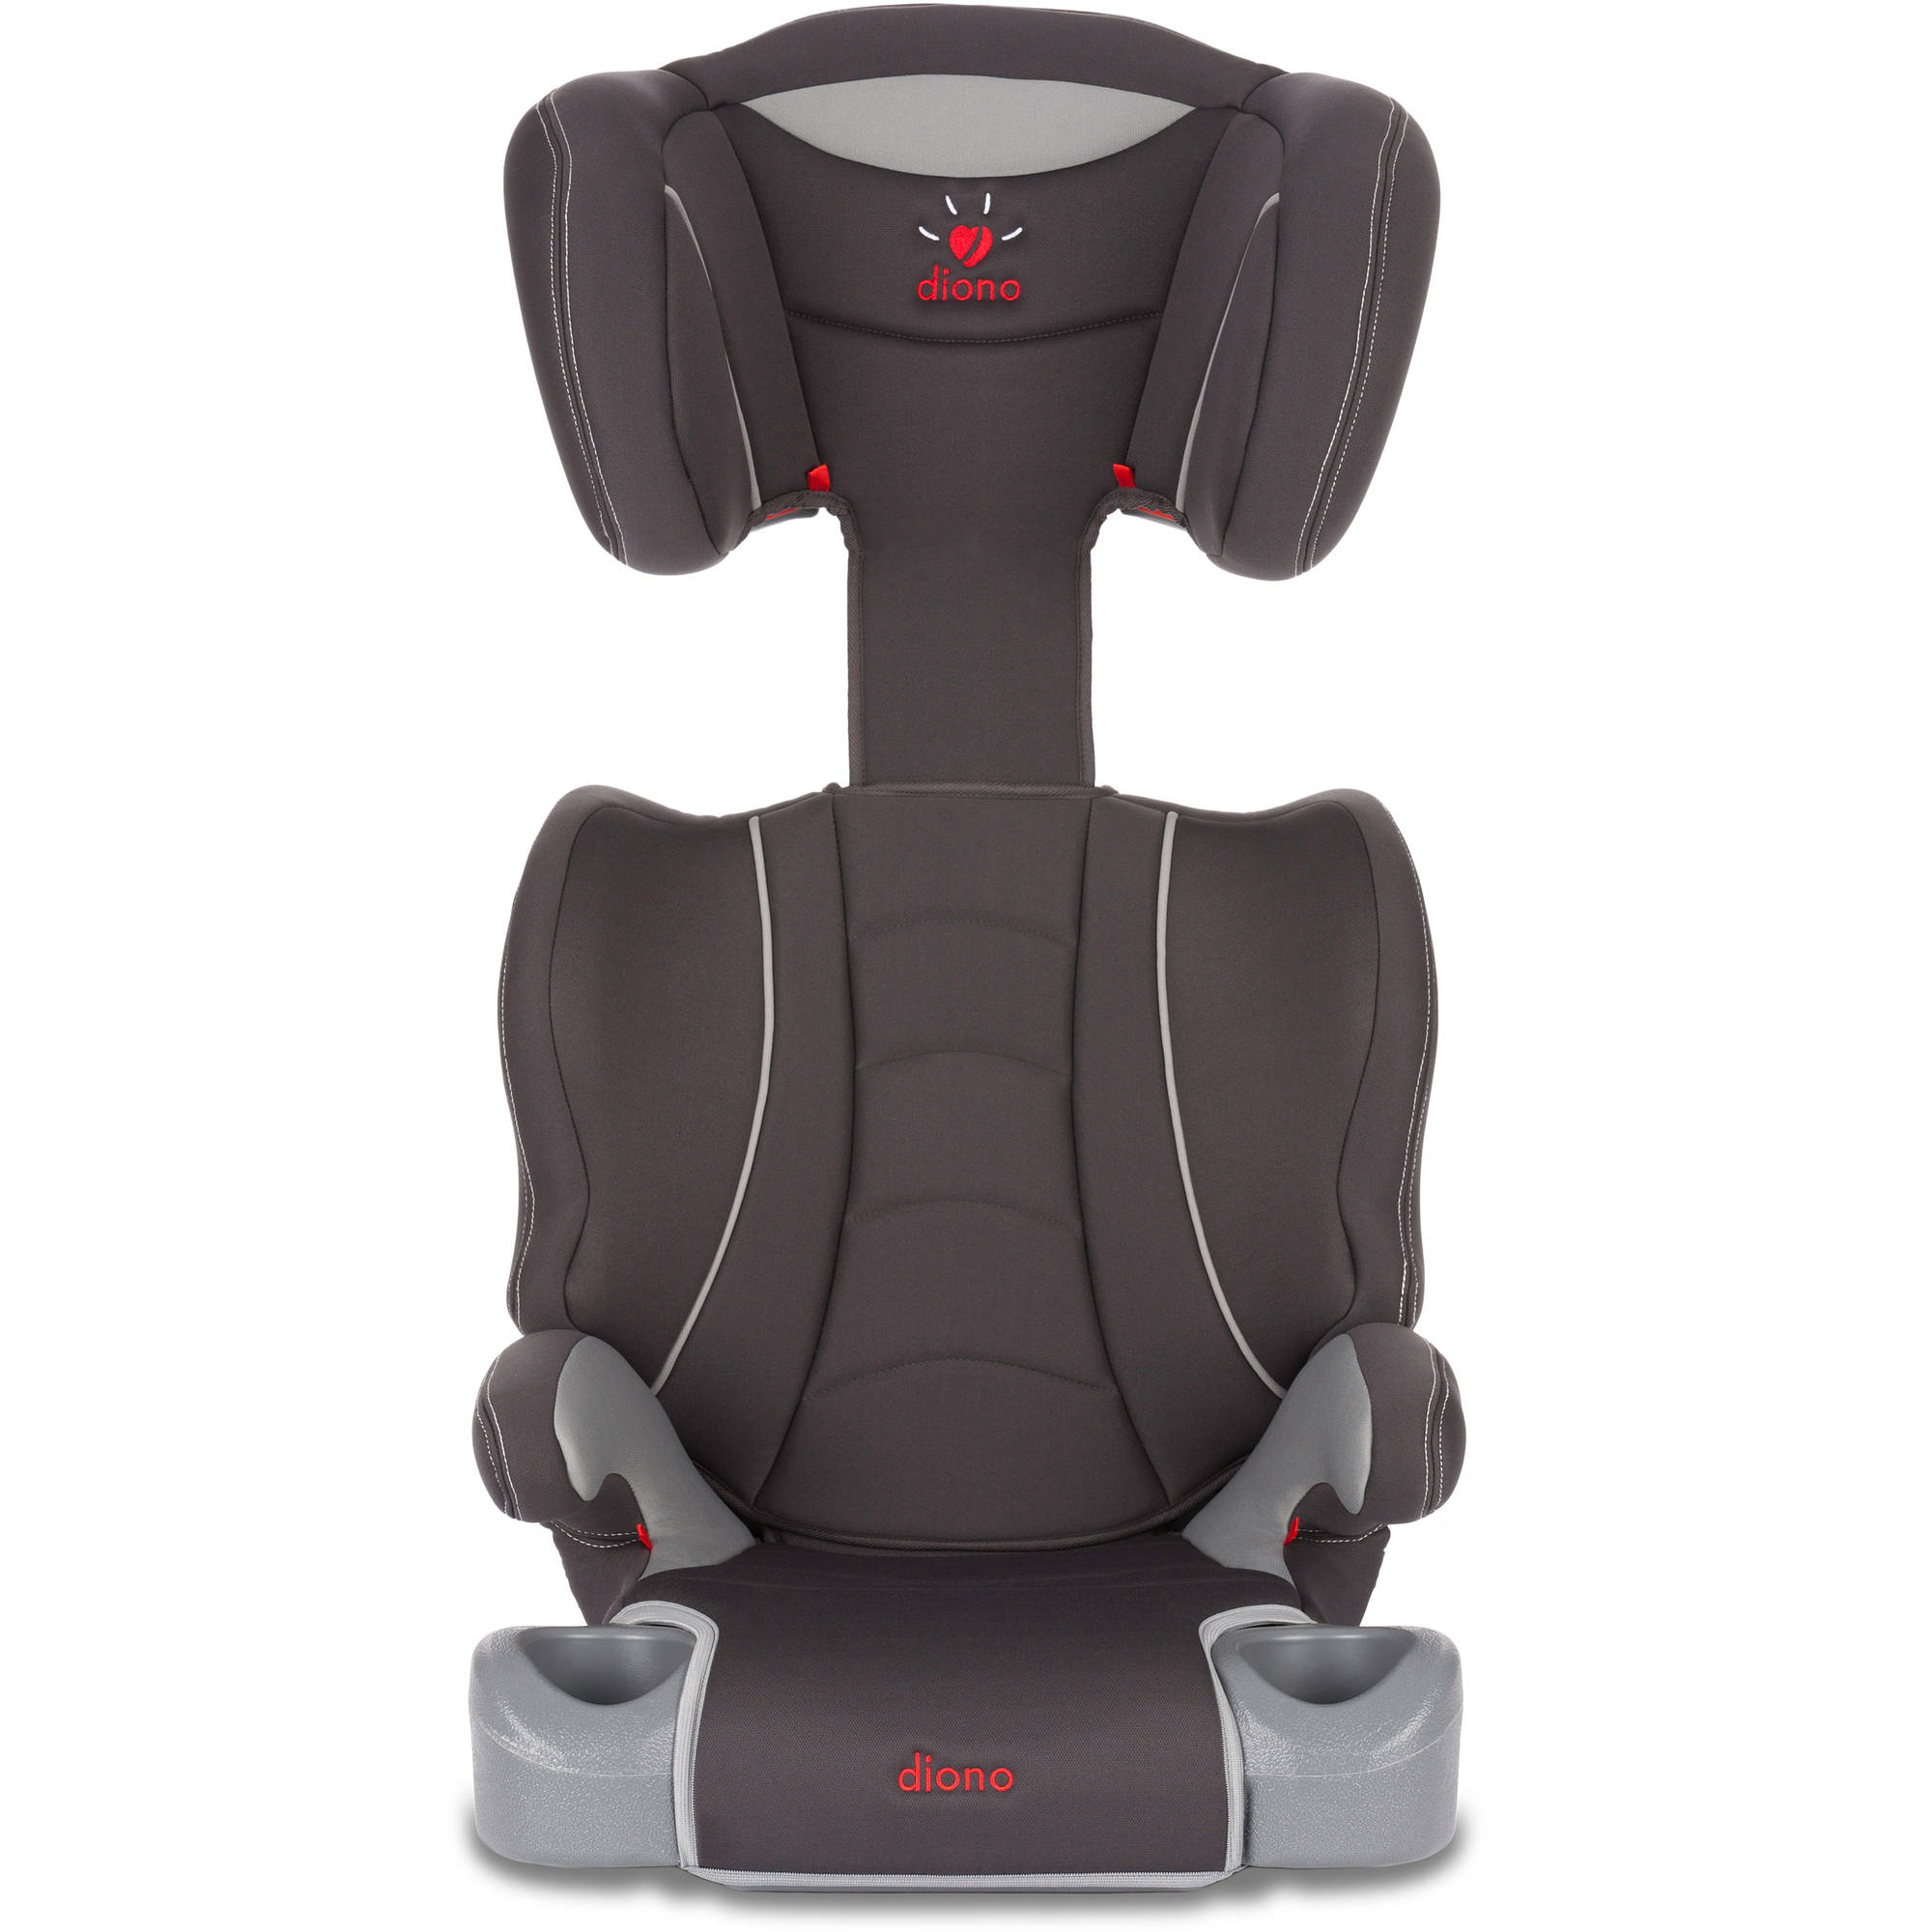 diono hip high back booster car seat with cup holders, slate - image 3 of 4